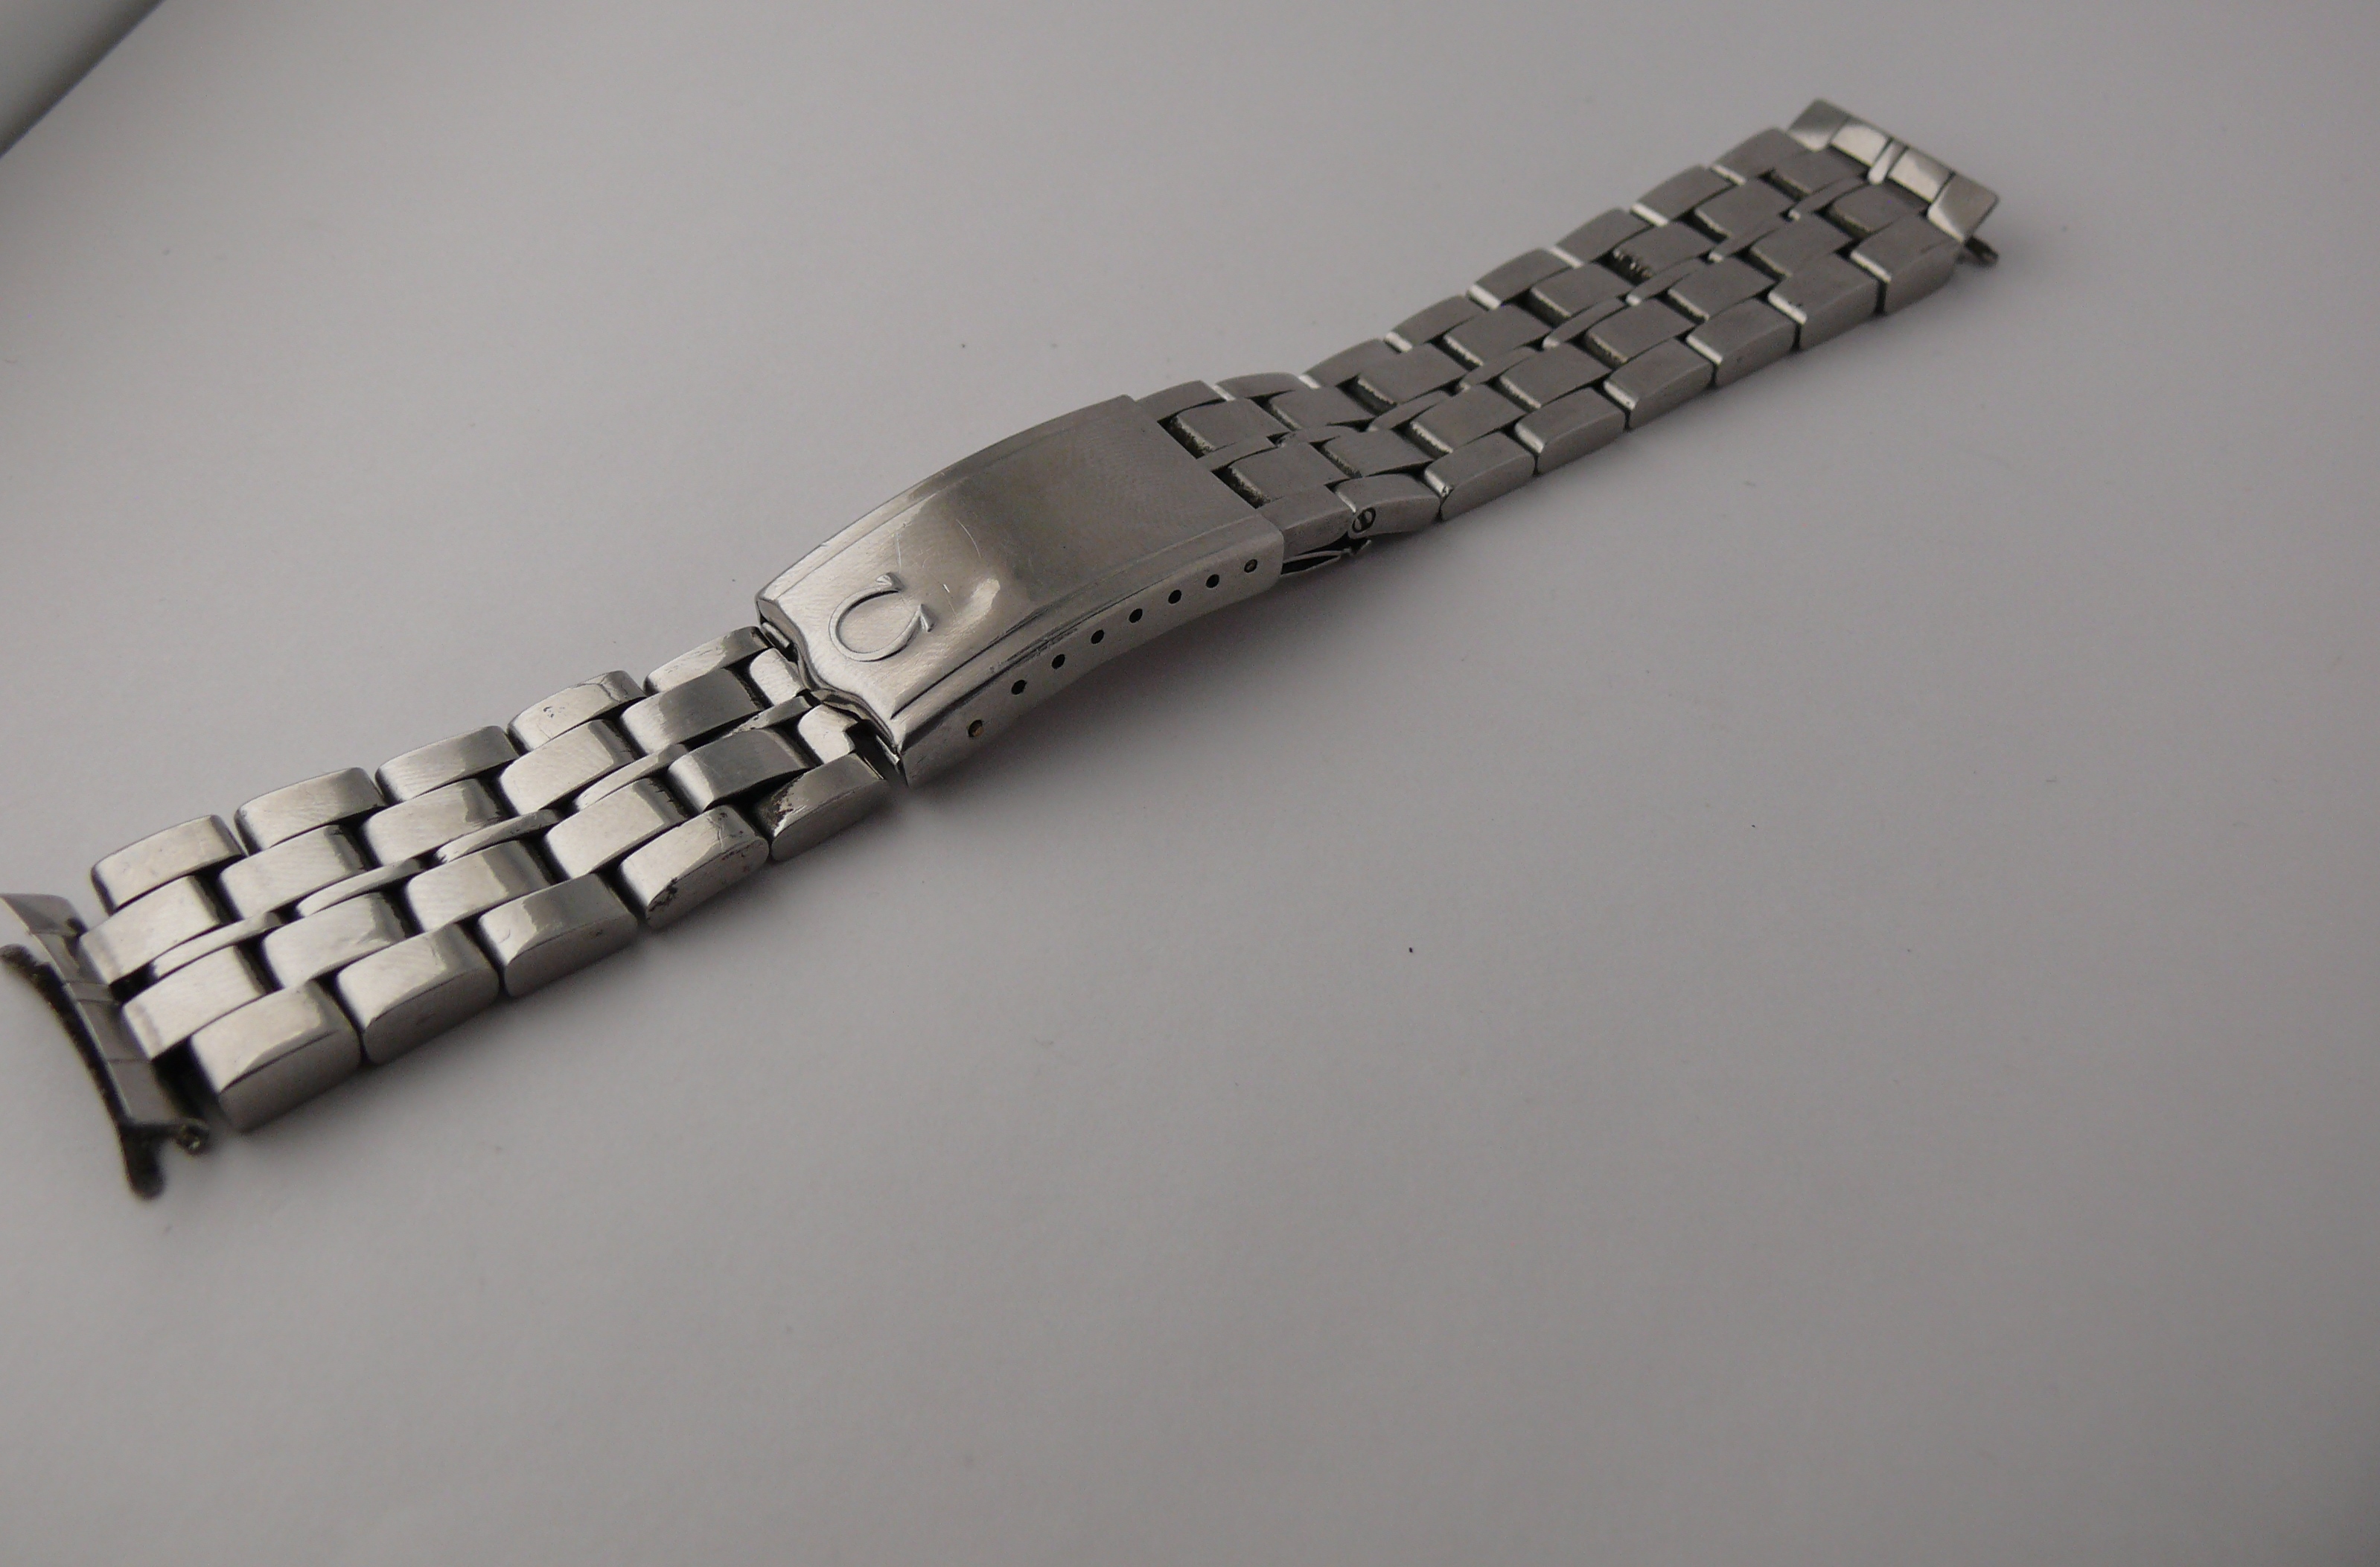 vintage omega 19 mm stainless steel bracelet 1093 w 515 ends, can be used for various seamaster